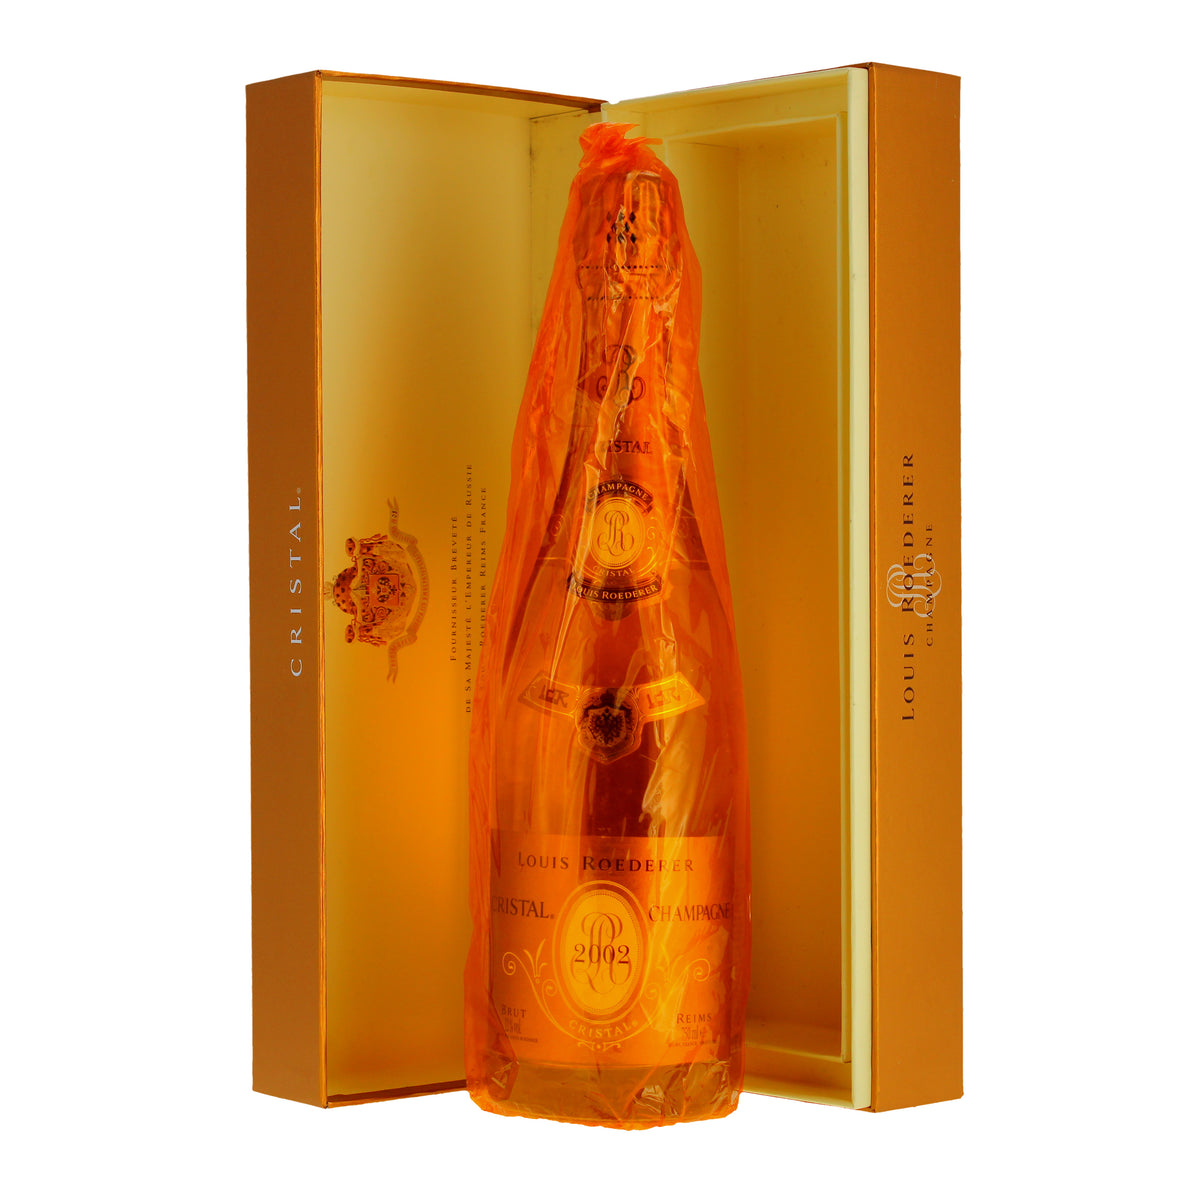 Louis Roederer Cristal in Gift Box 2002